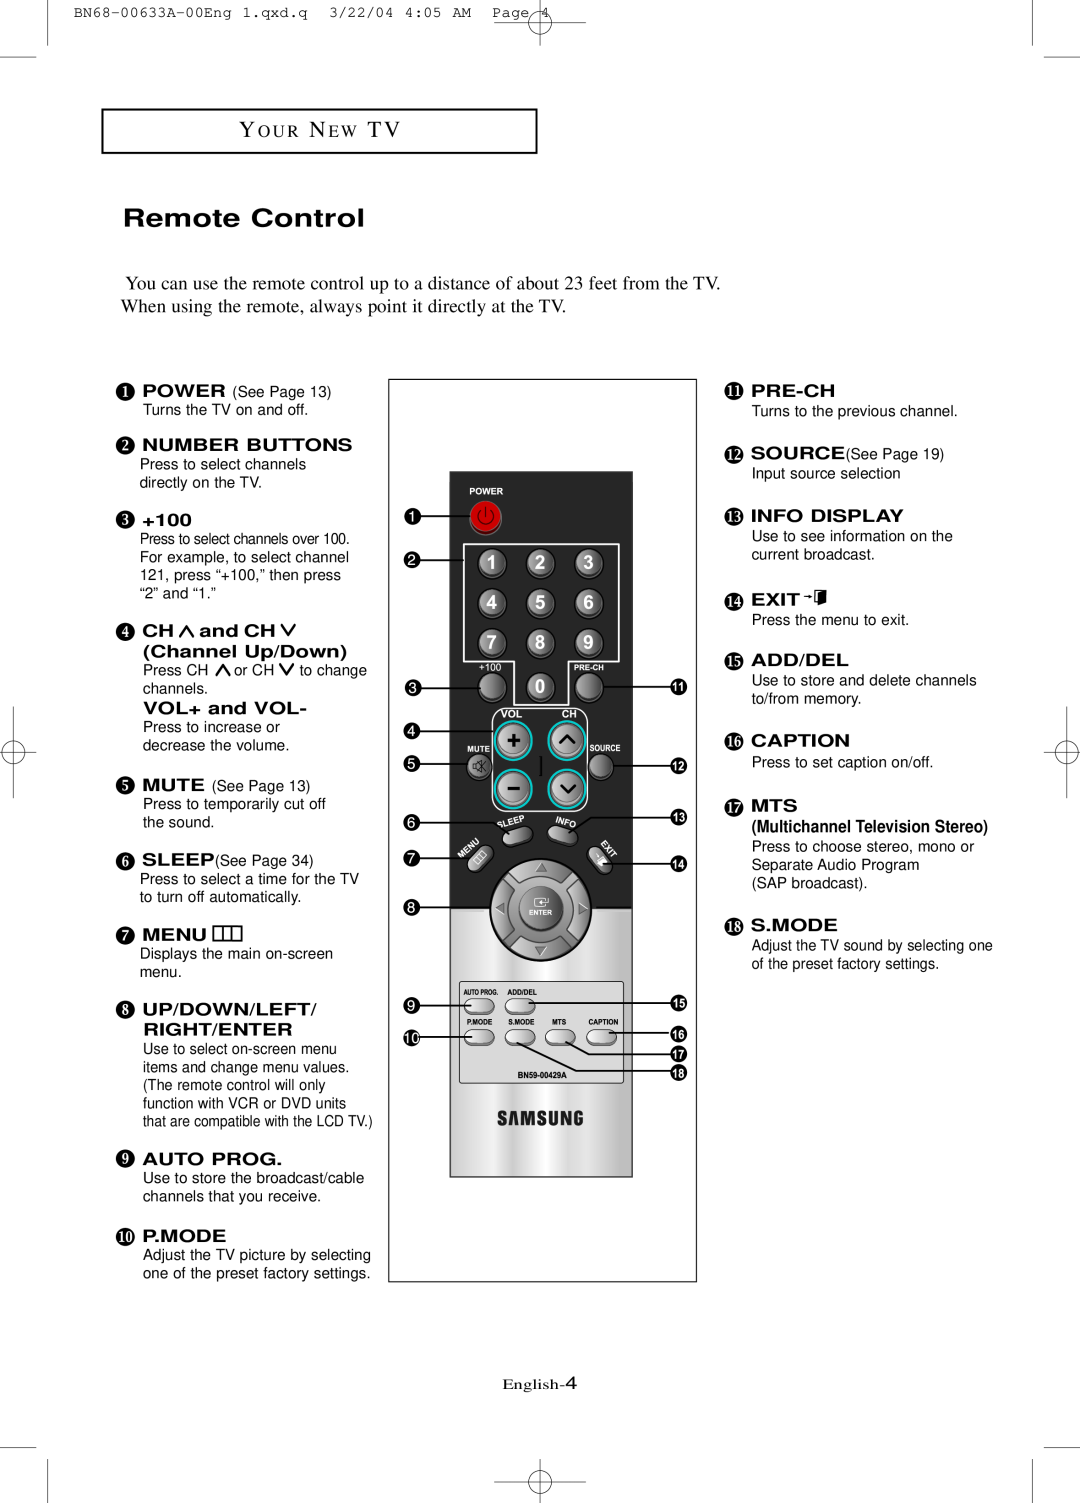 Samsung LT-P 1545 Remote Control, Number Buttons, +100, CH and CH Channel Up/Down, VOL+ and VOL, Menu, Auto Prog, P.Mode 